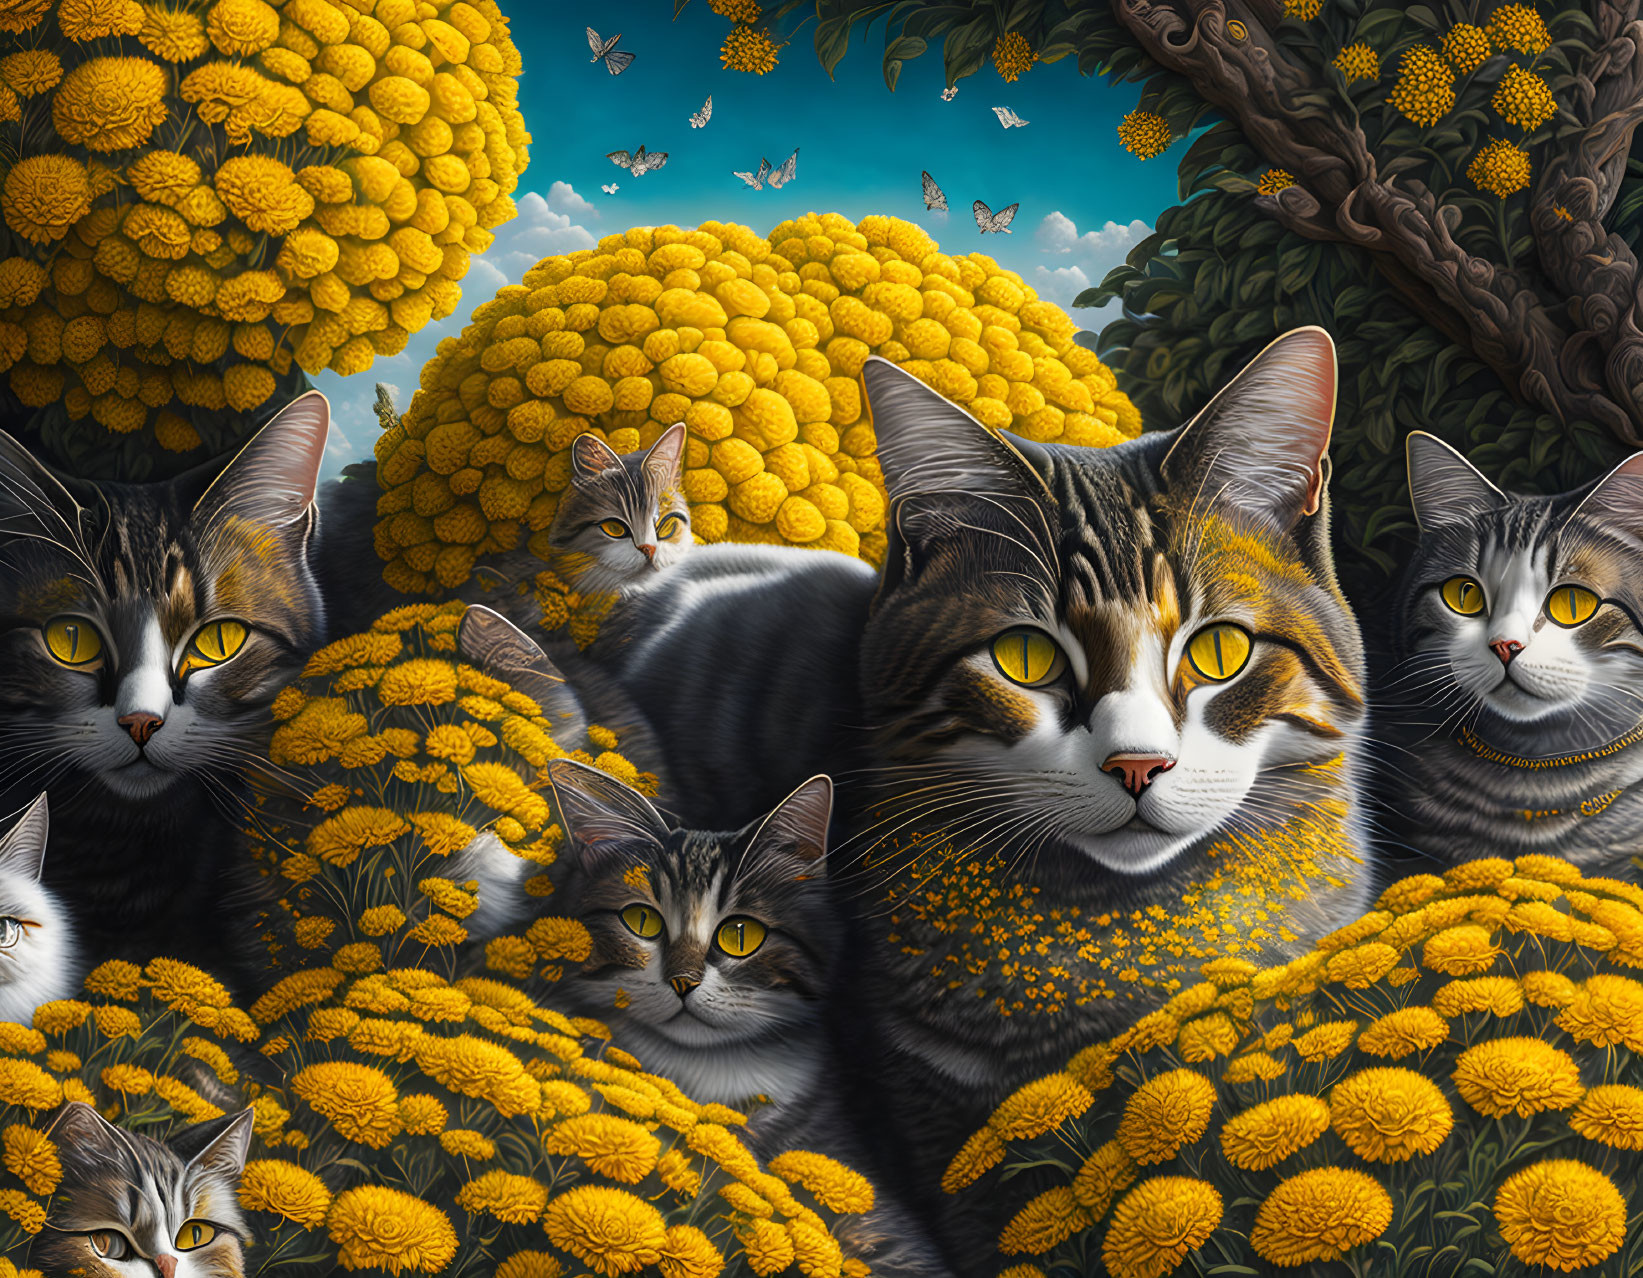 Illustrated scene: Cats blend with marigold flowers under blue sky